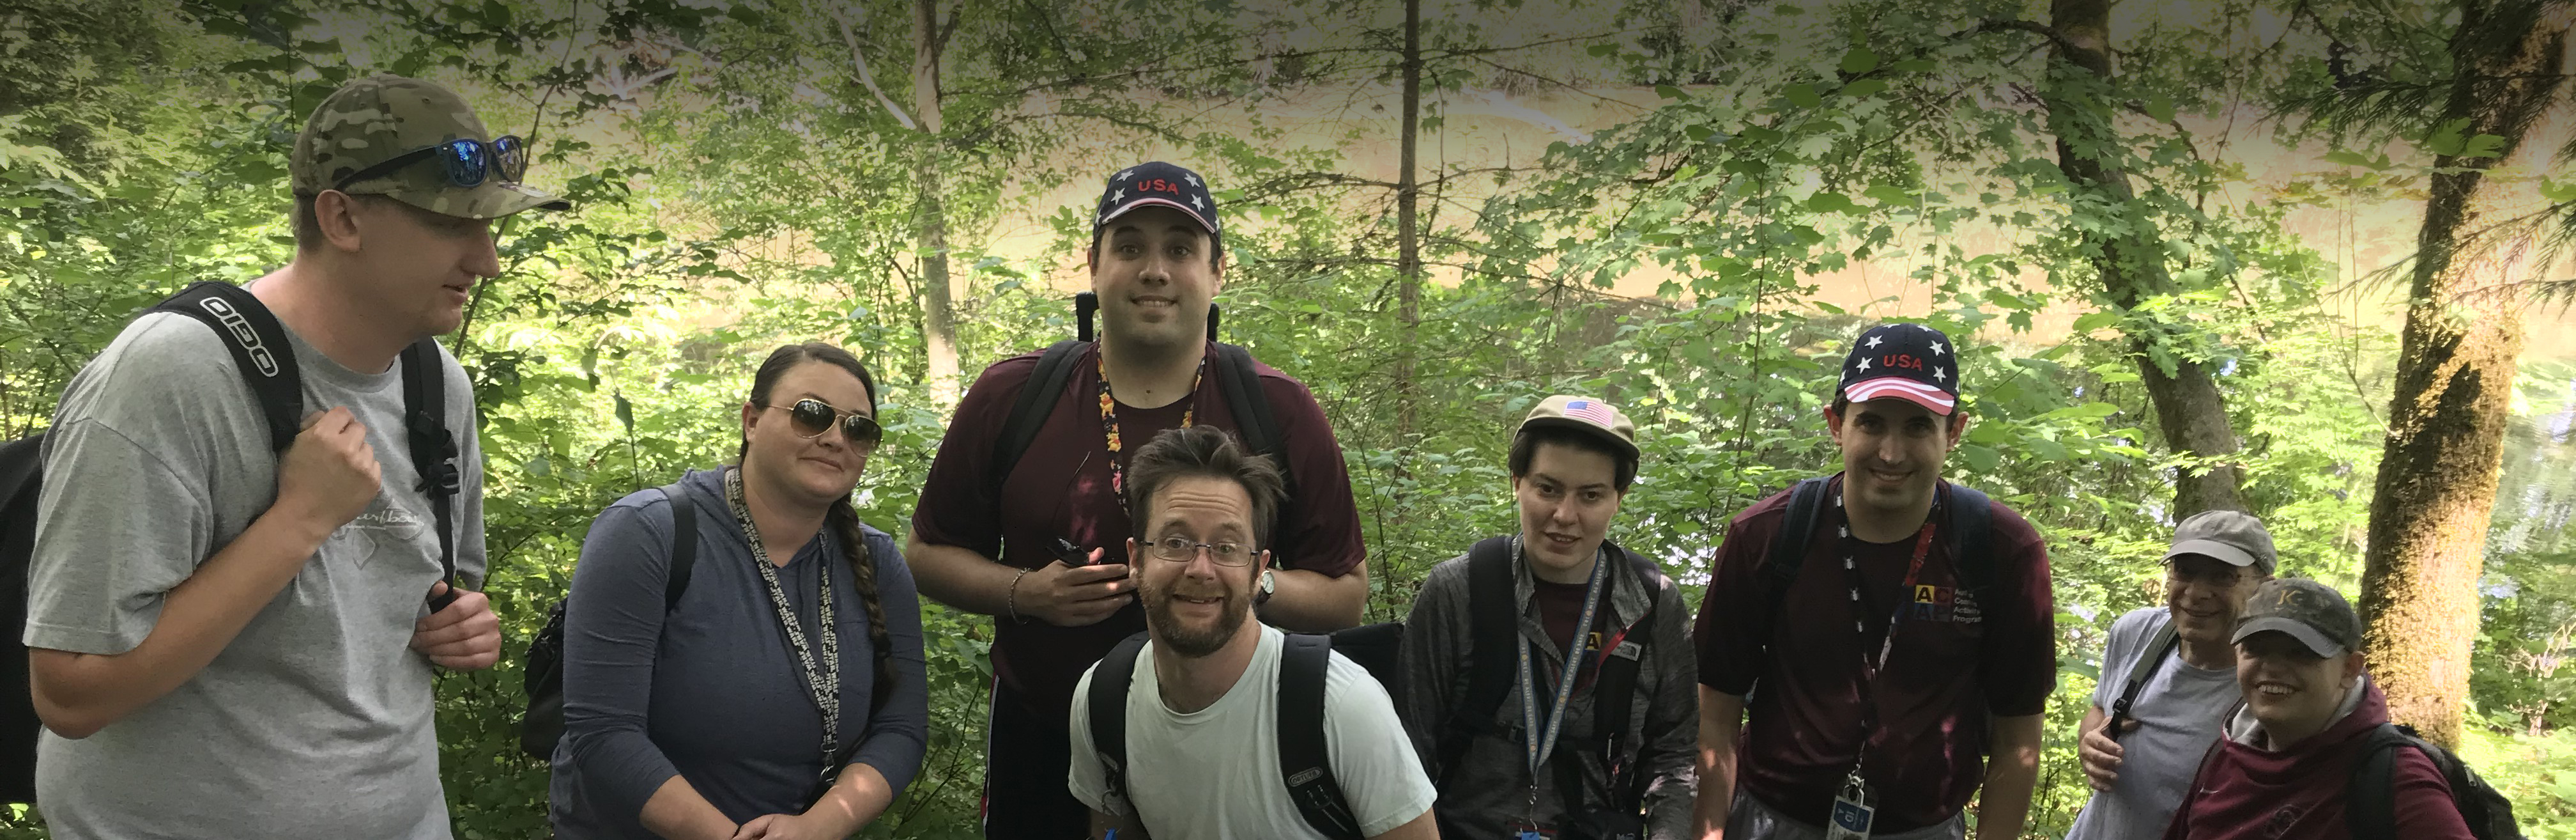 A group of ACAP campers and staff posing in a forest